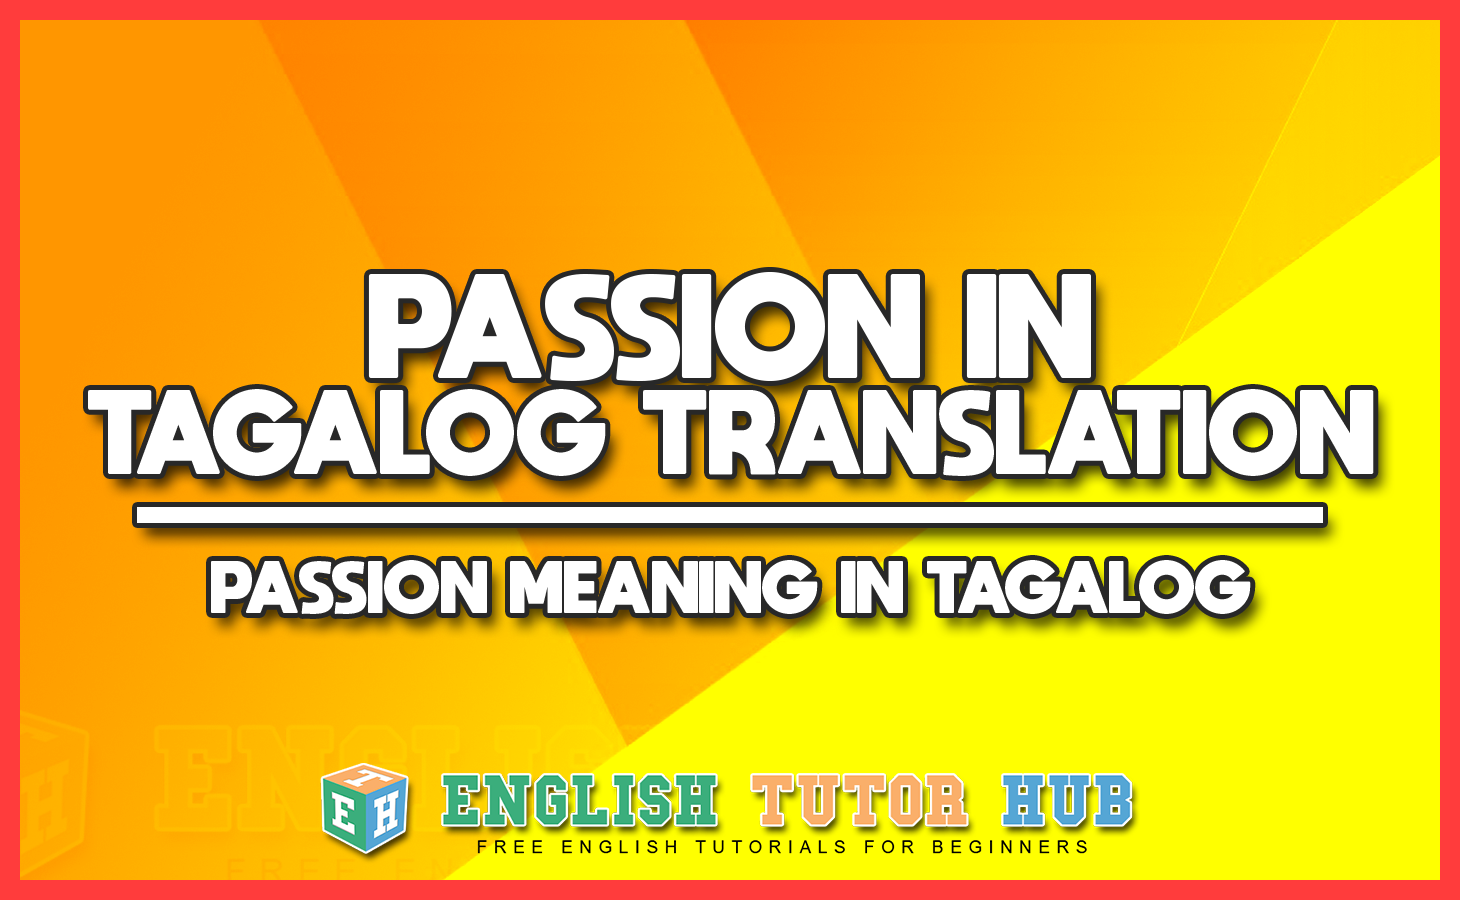 PASSION IN TAGALOG TRANSLATION